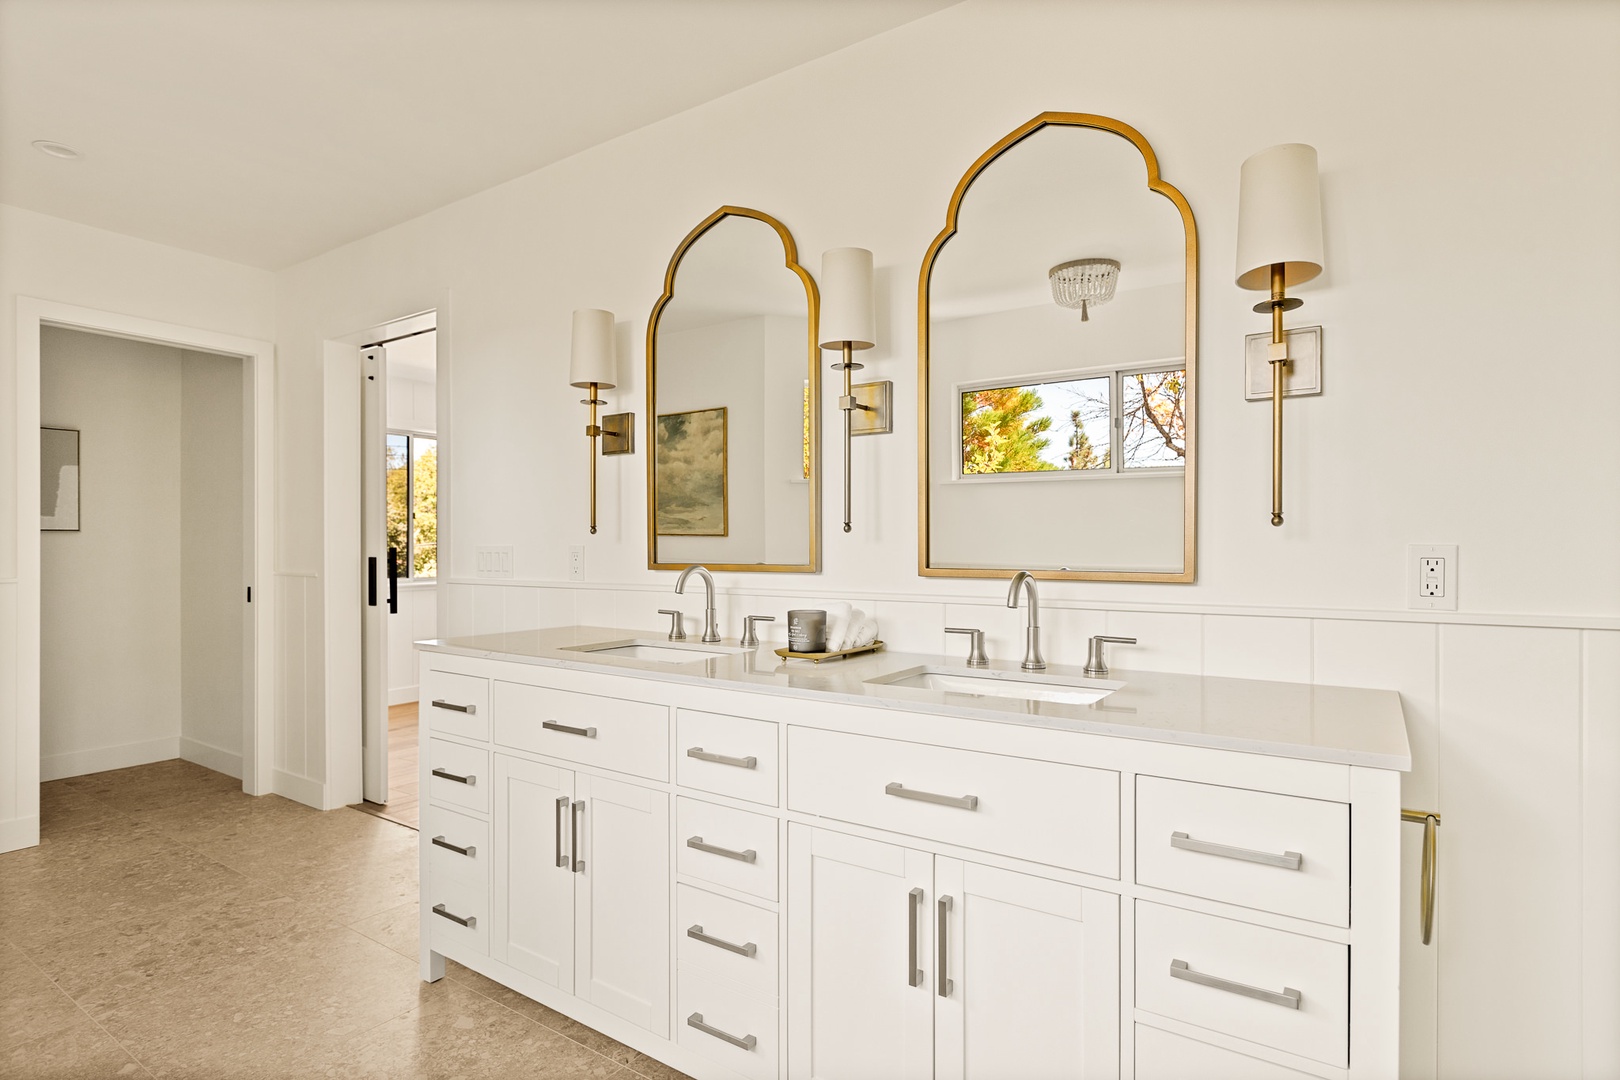 Vanity in bathroom #1. Enjoy spa-like treatment in this space while you get ready for a night out